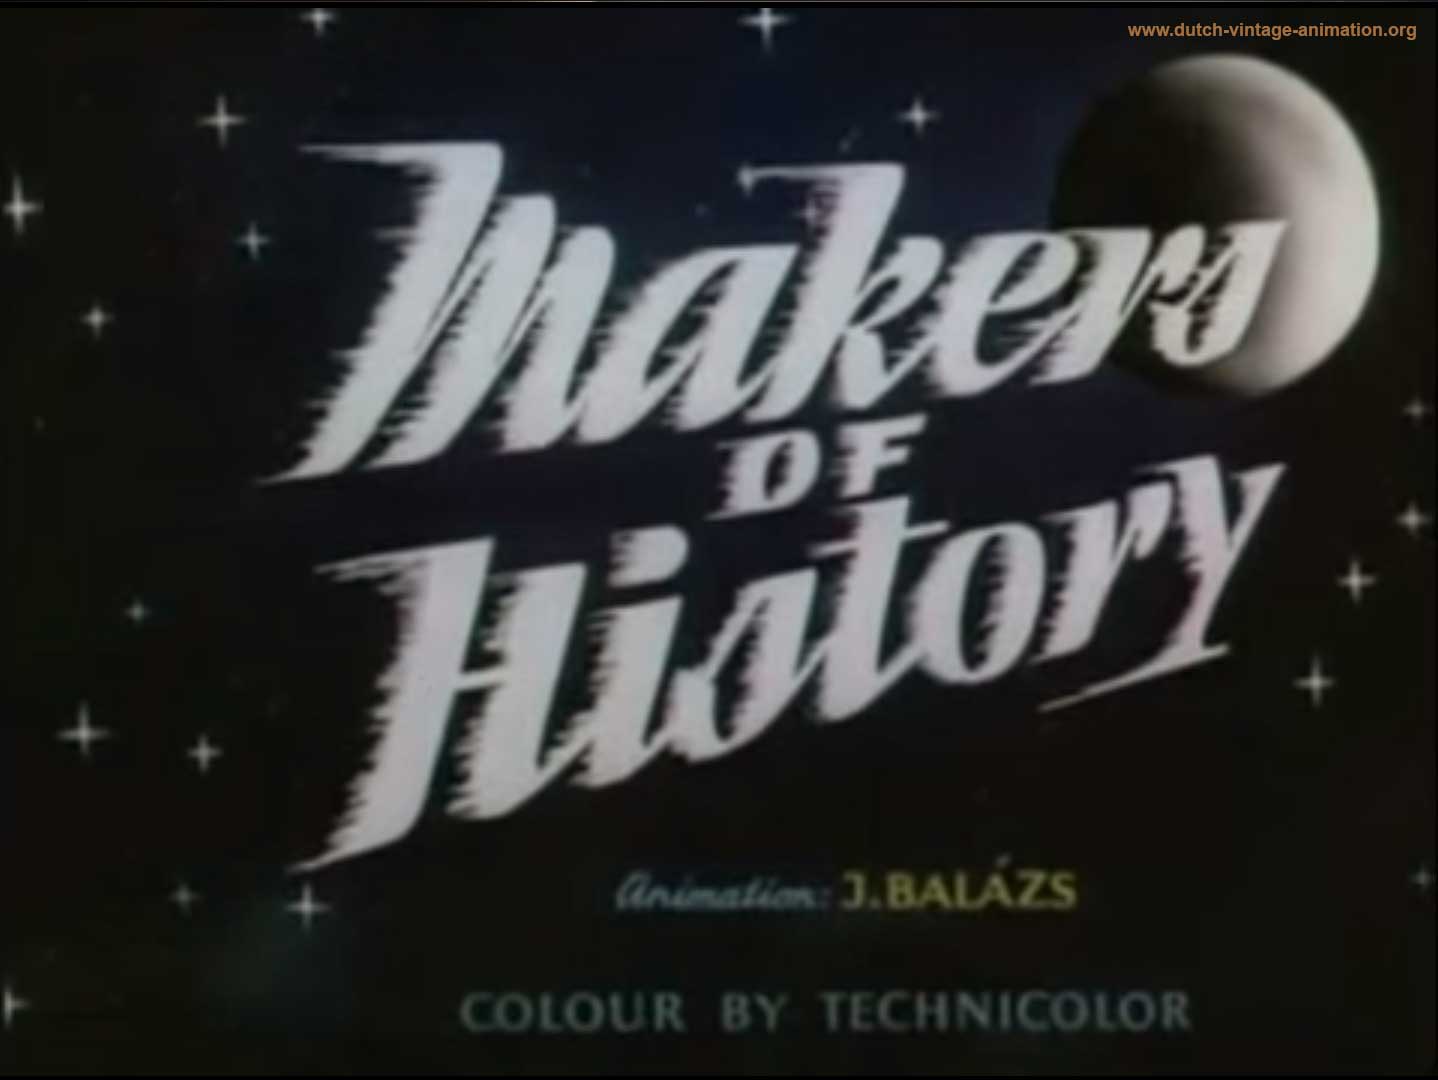 Makers of History (1955)